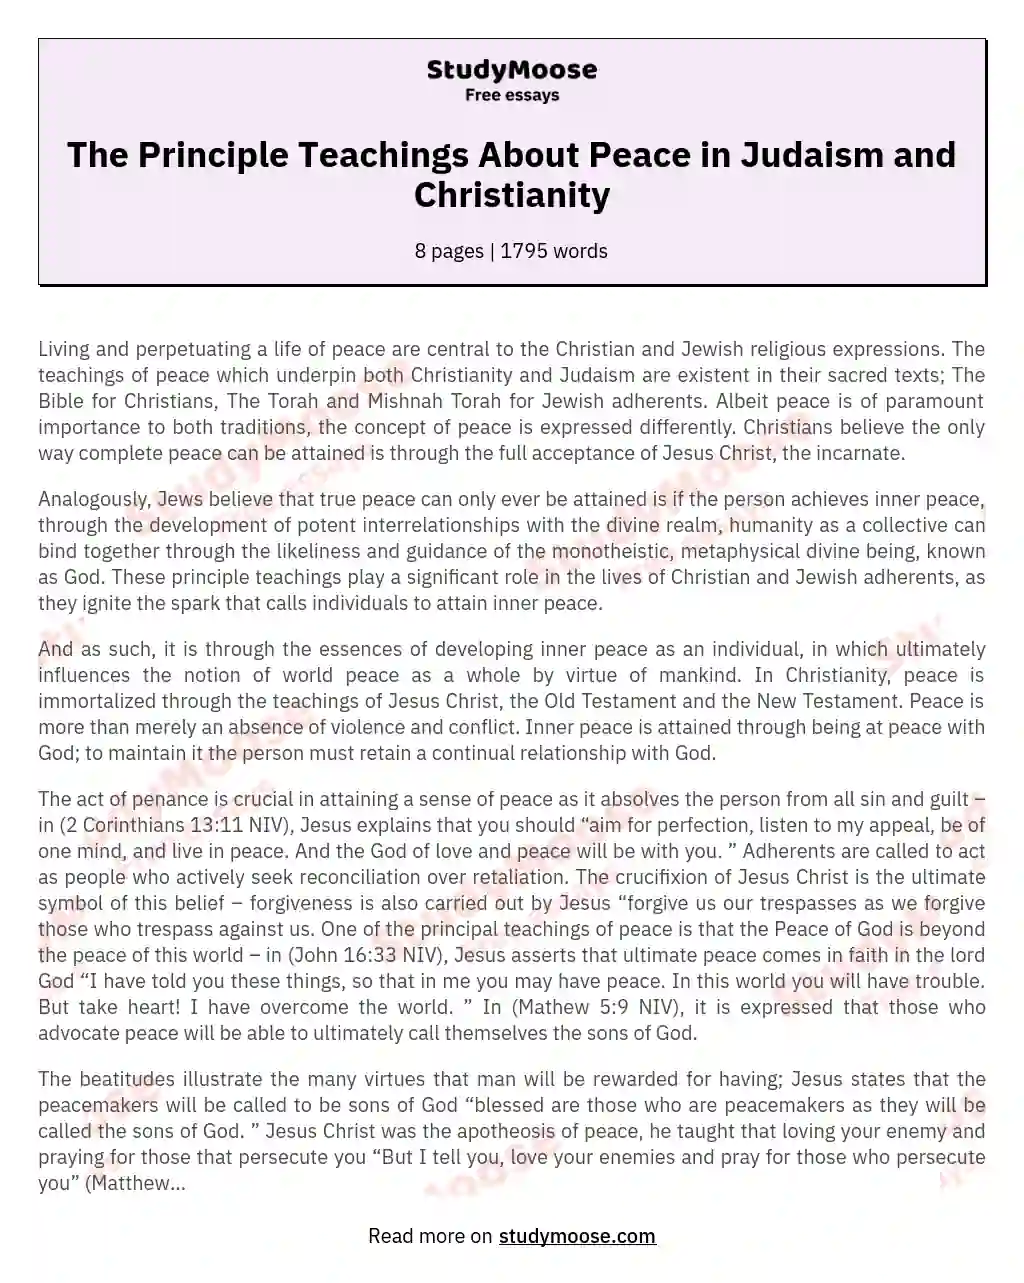 The Principle Teachings About Peace in Judaism and Christianity